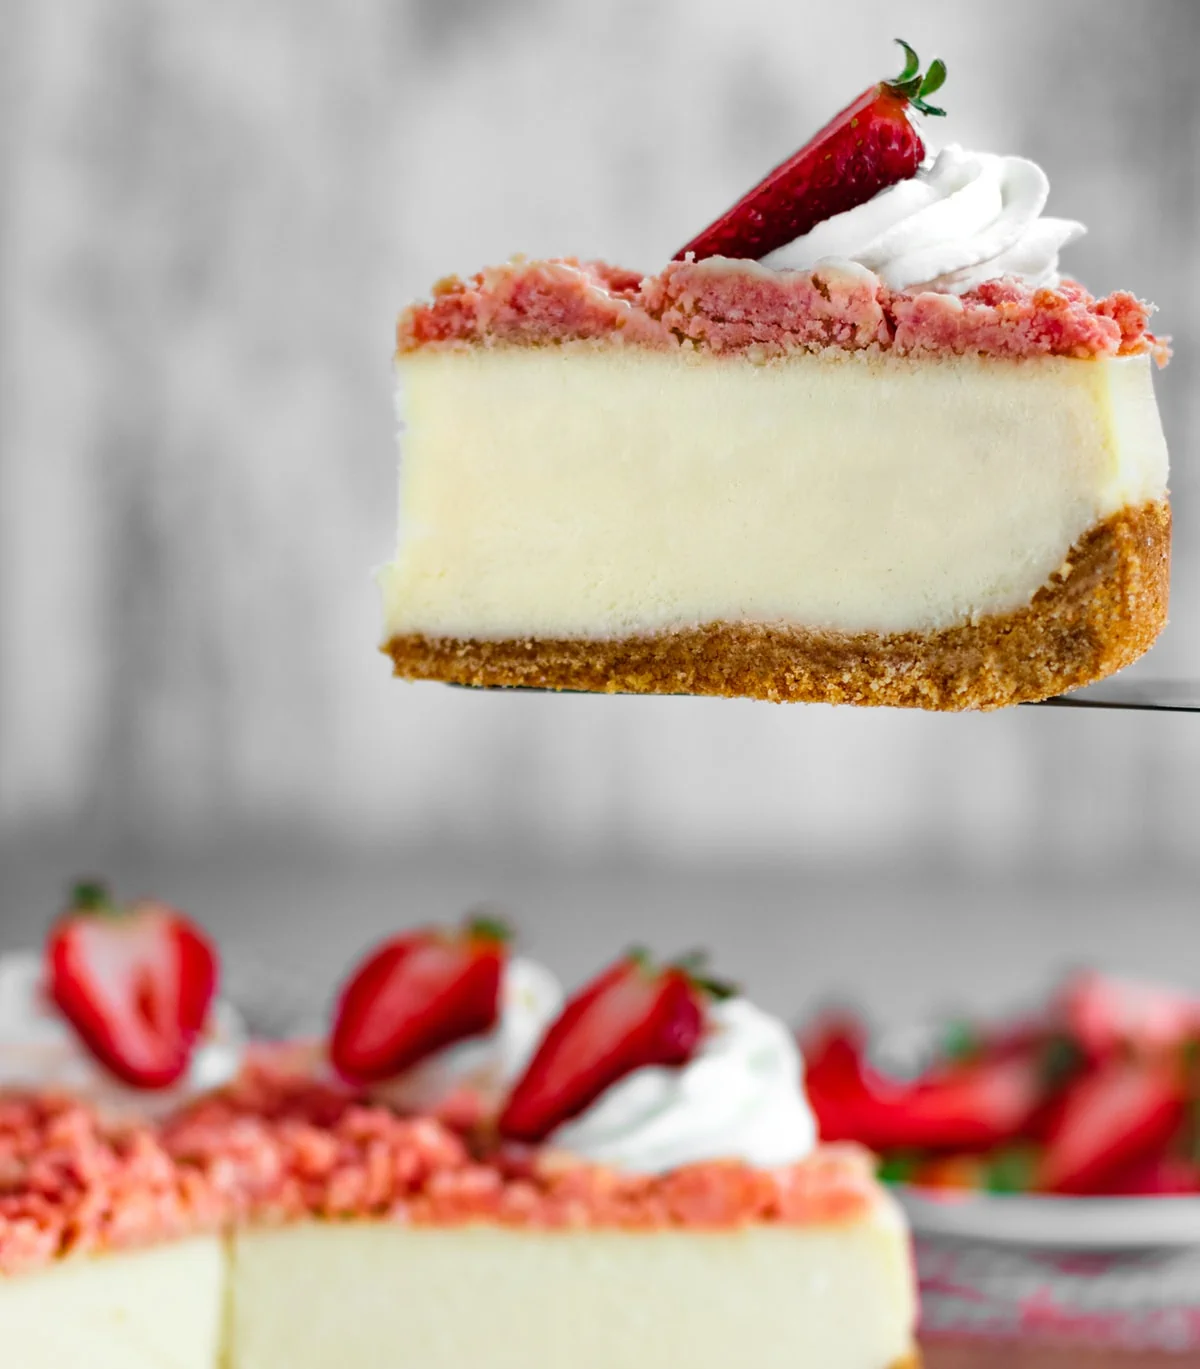 Strawberry Crunch Cheesecake Slice with Whipped Cream